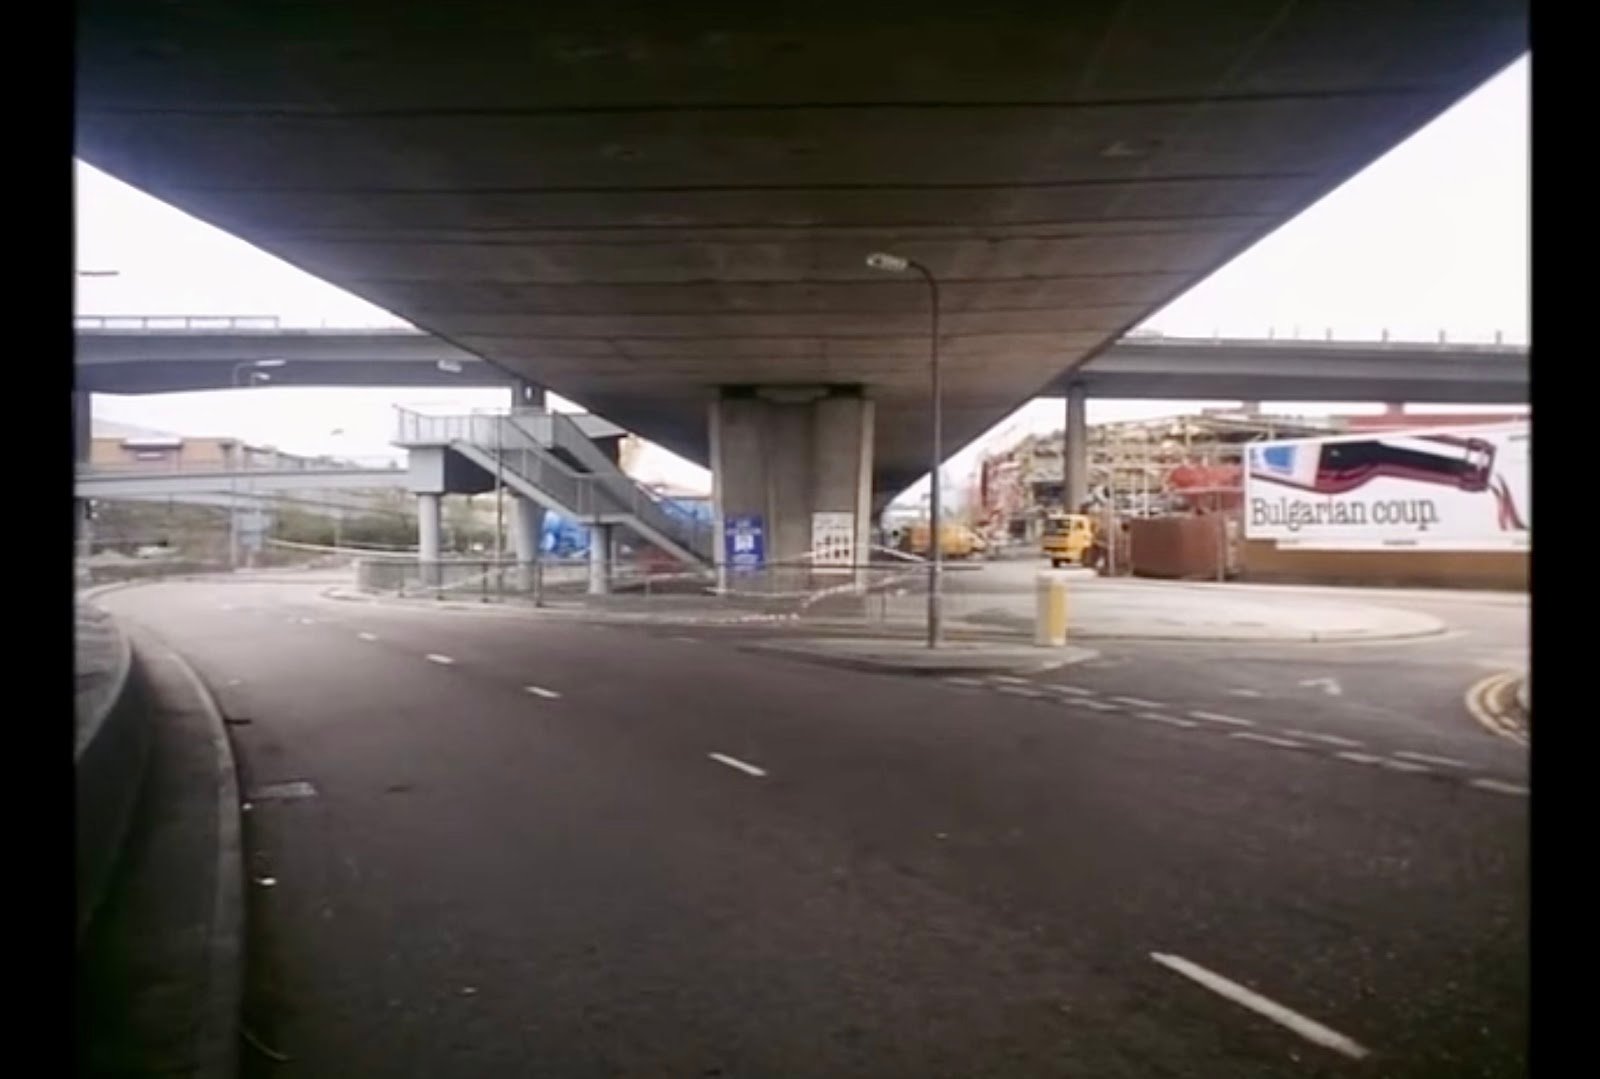 A view of an empty underpass under which A road diagonally cuts through. Outlines of a bridge create a vanishing point at the centre of the frame.